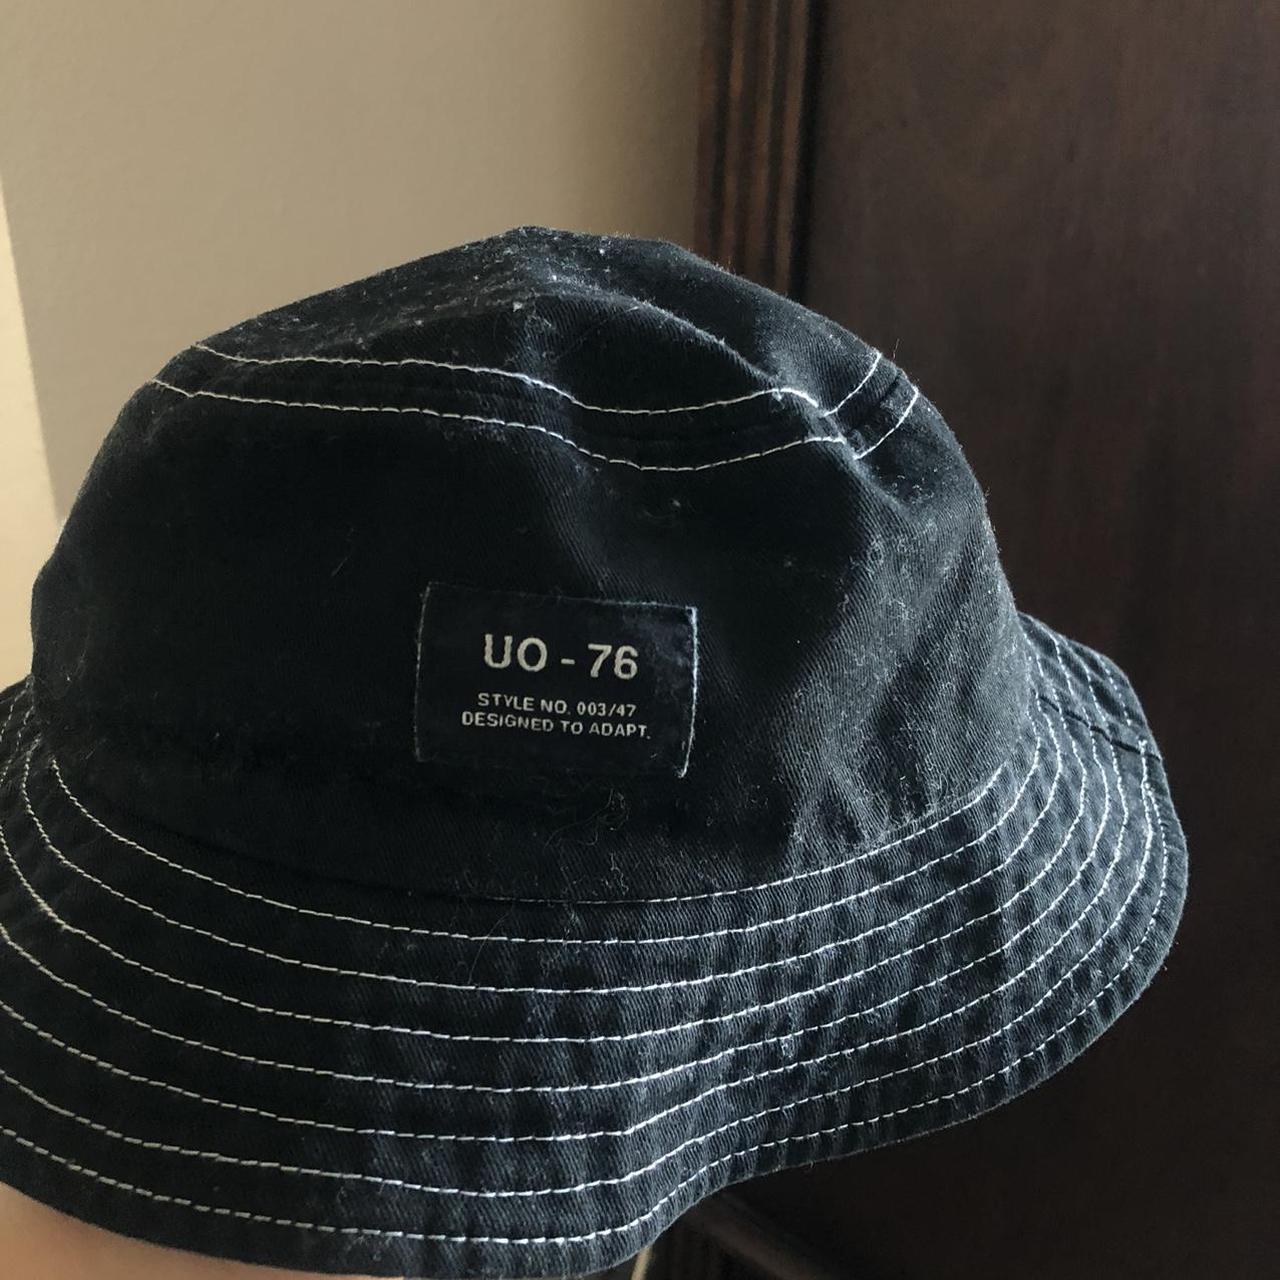 Urban Outfitters Men's Black and White Hat